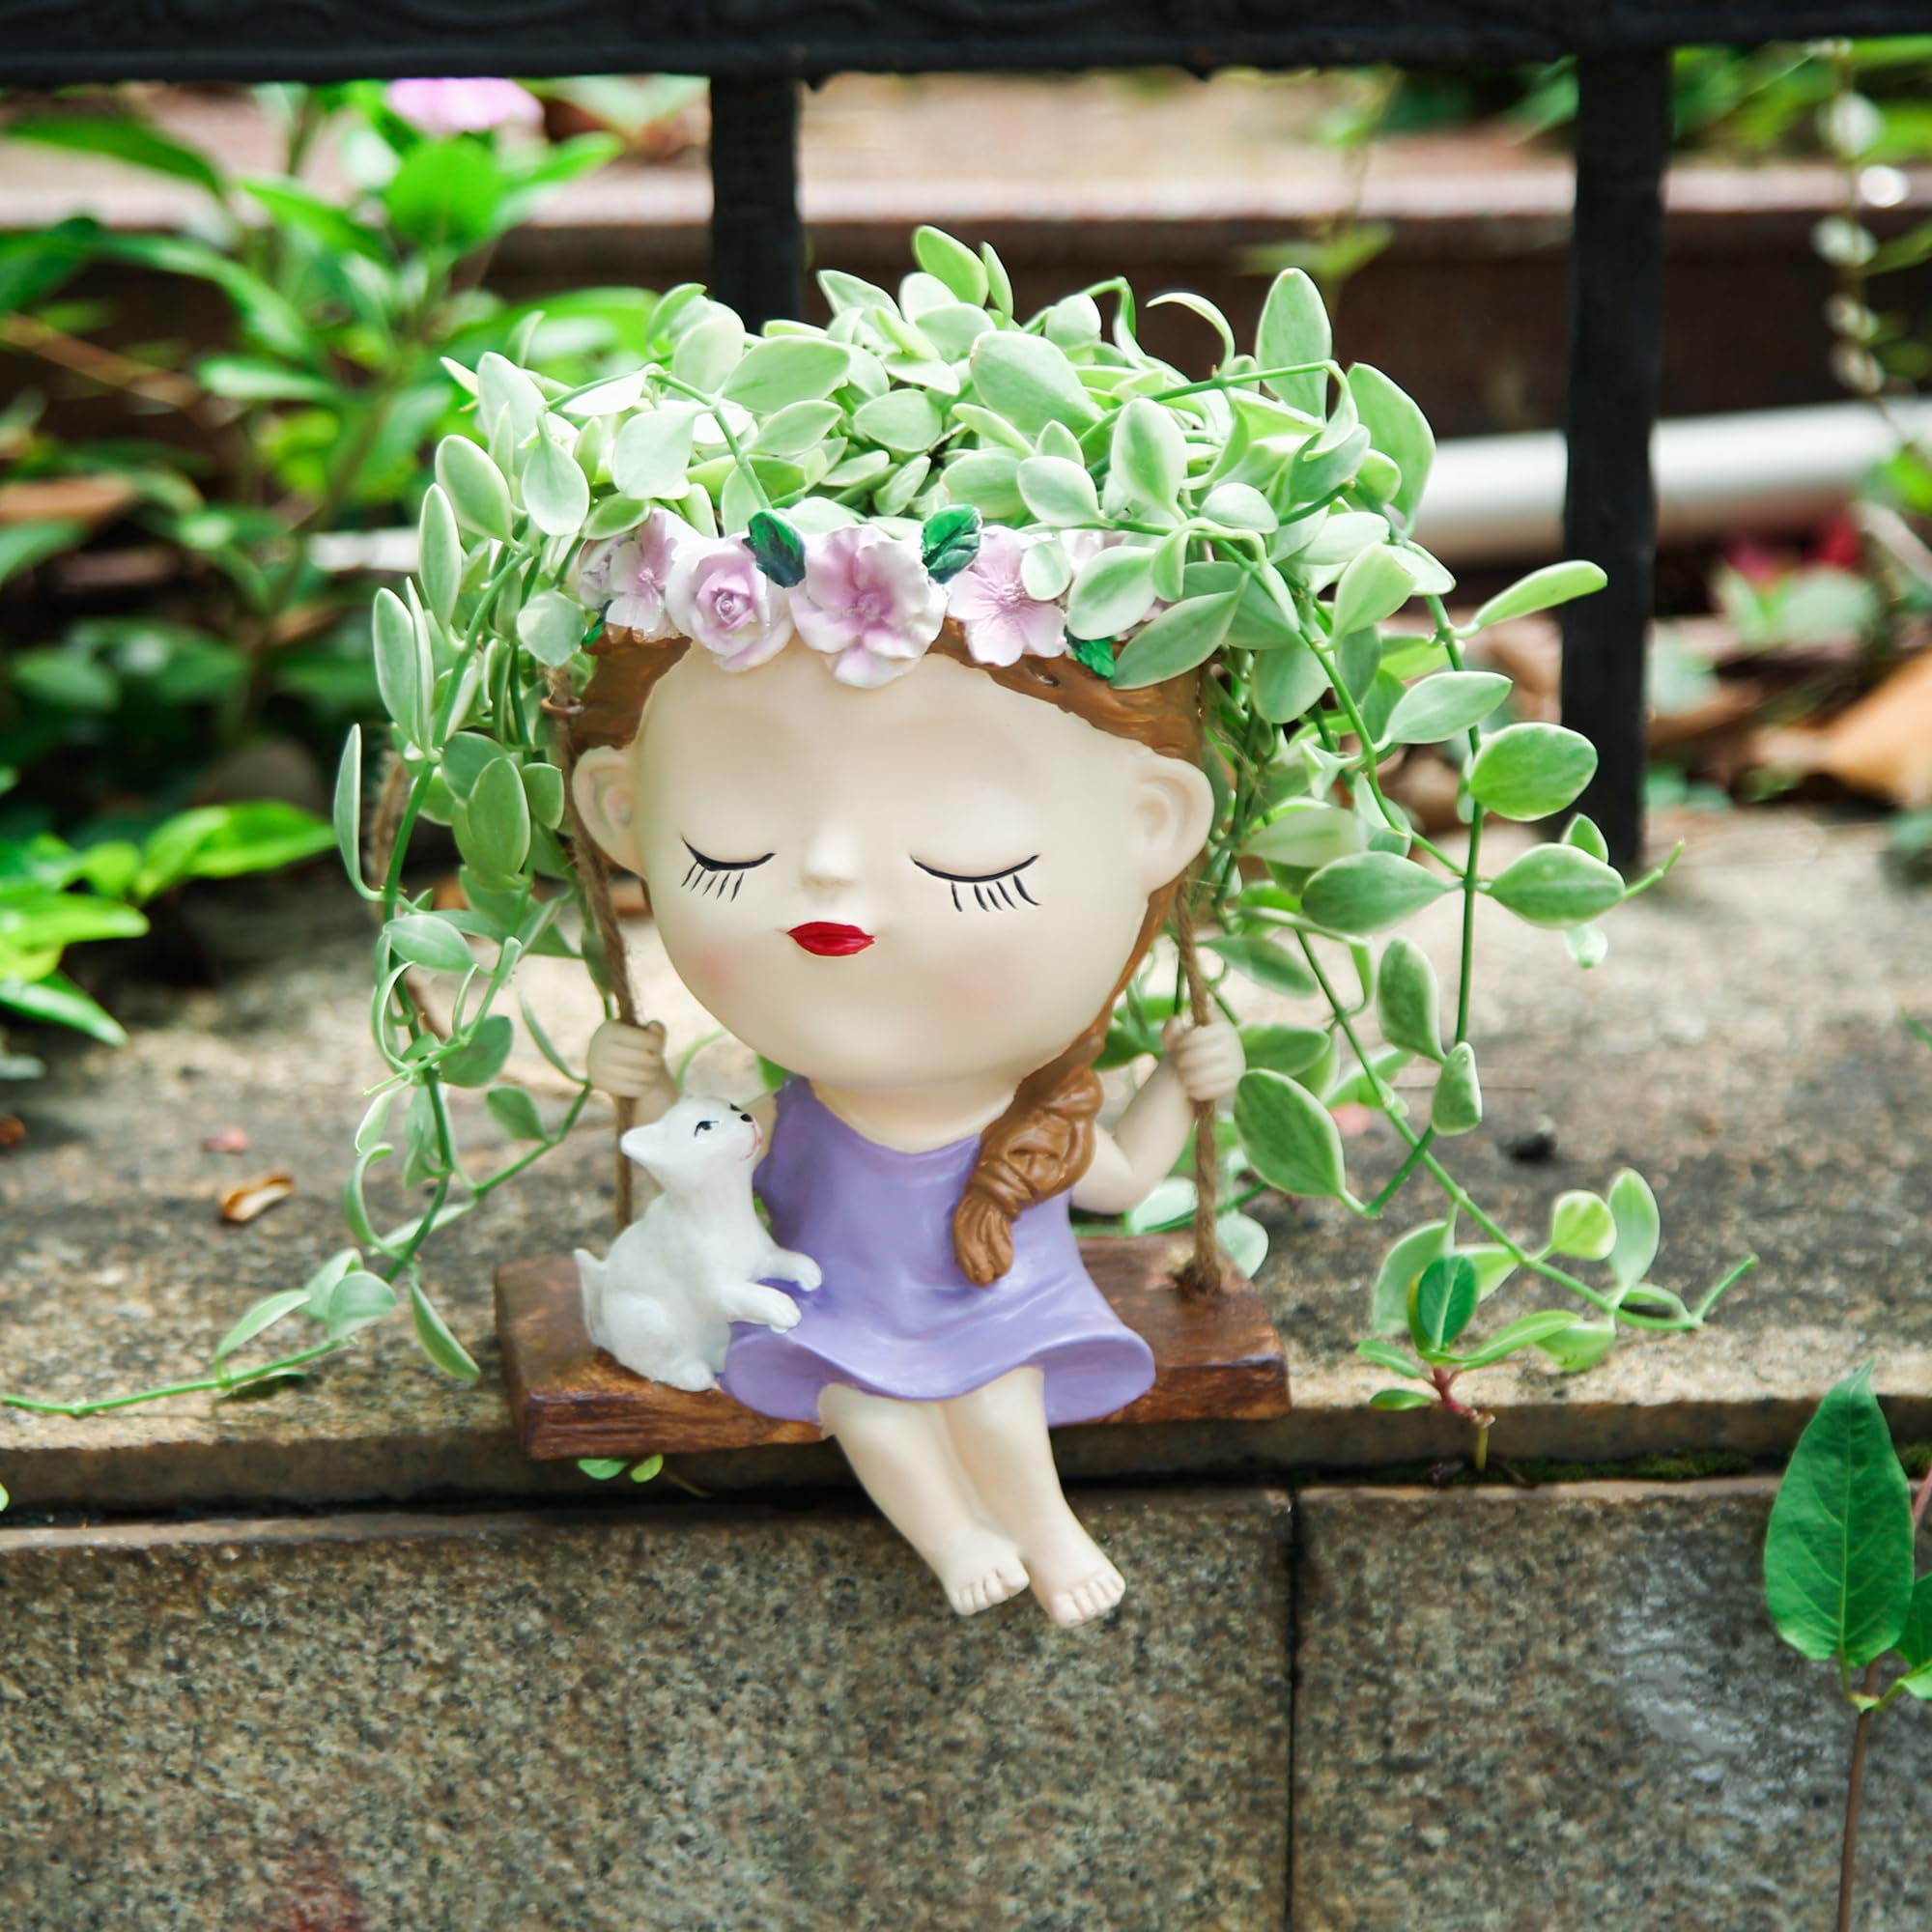 Mrsivrop Hanging Swing Face Planters Pots for Indoor Outdoor Plants, Cute Wall Hanging Planters, Large Unique Head Flower Planter Pots for Outside with Drainage Holes, Purple